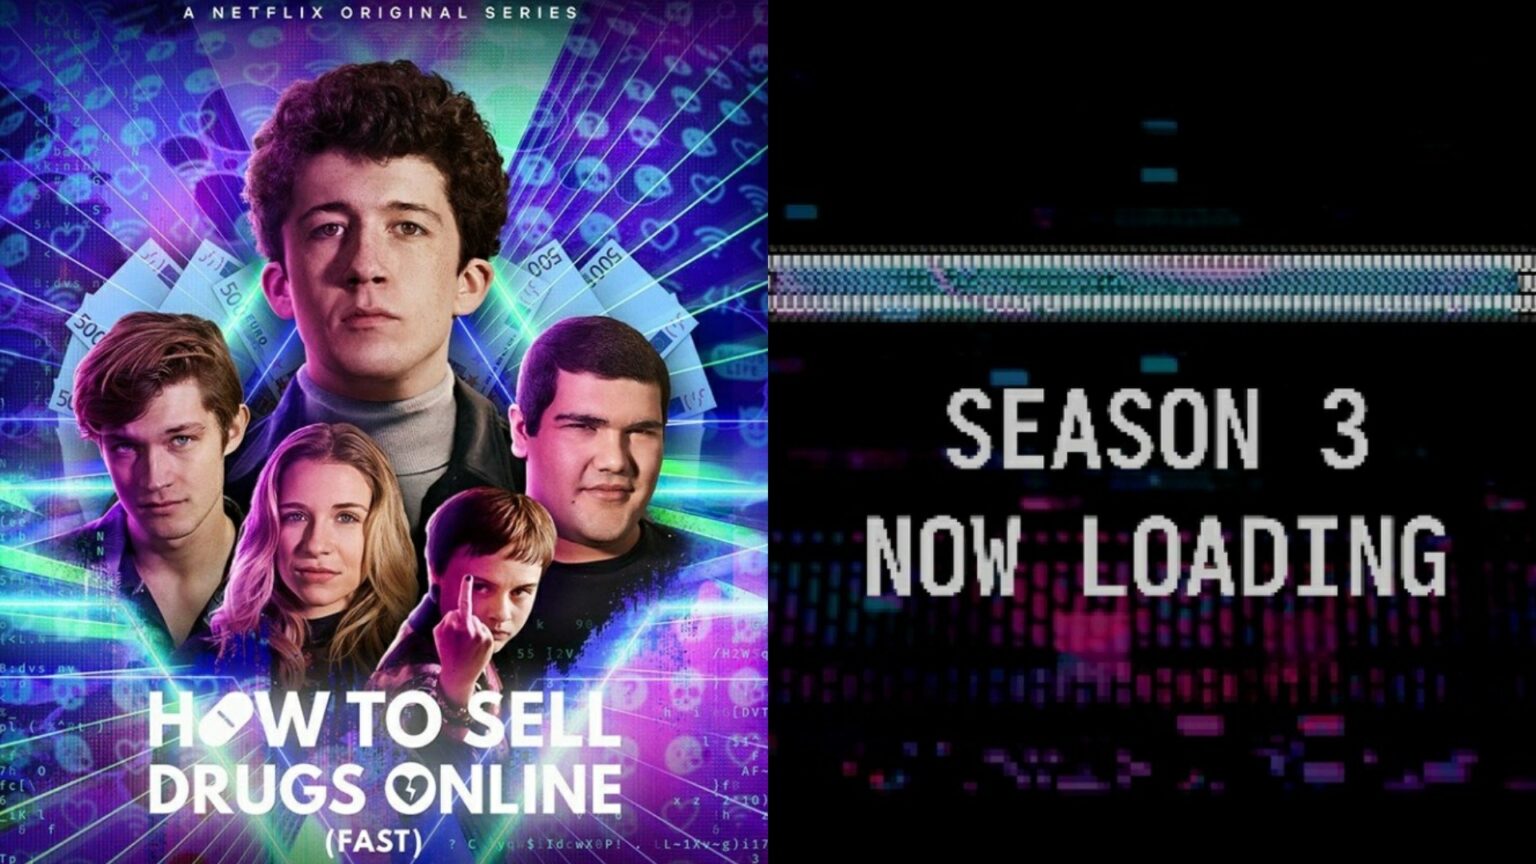 How to Sell Drugs Online (Fast) Season 3